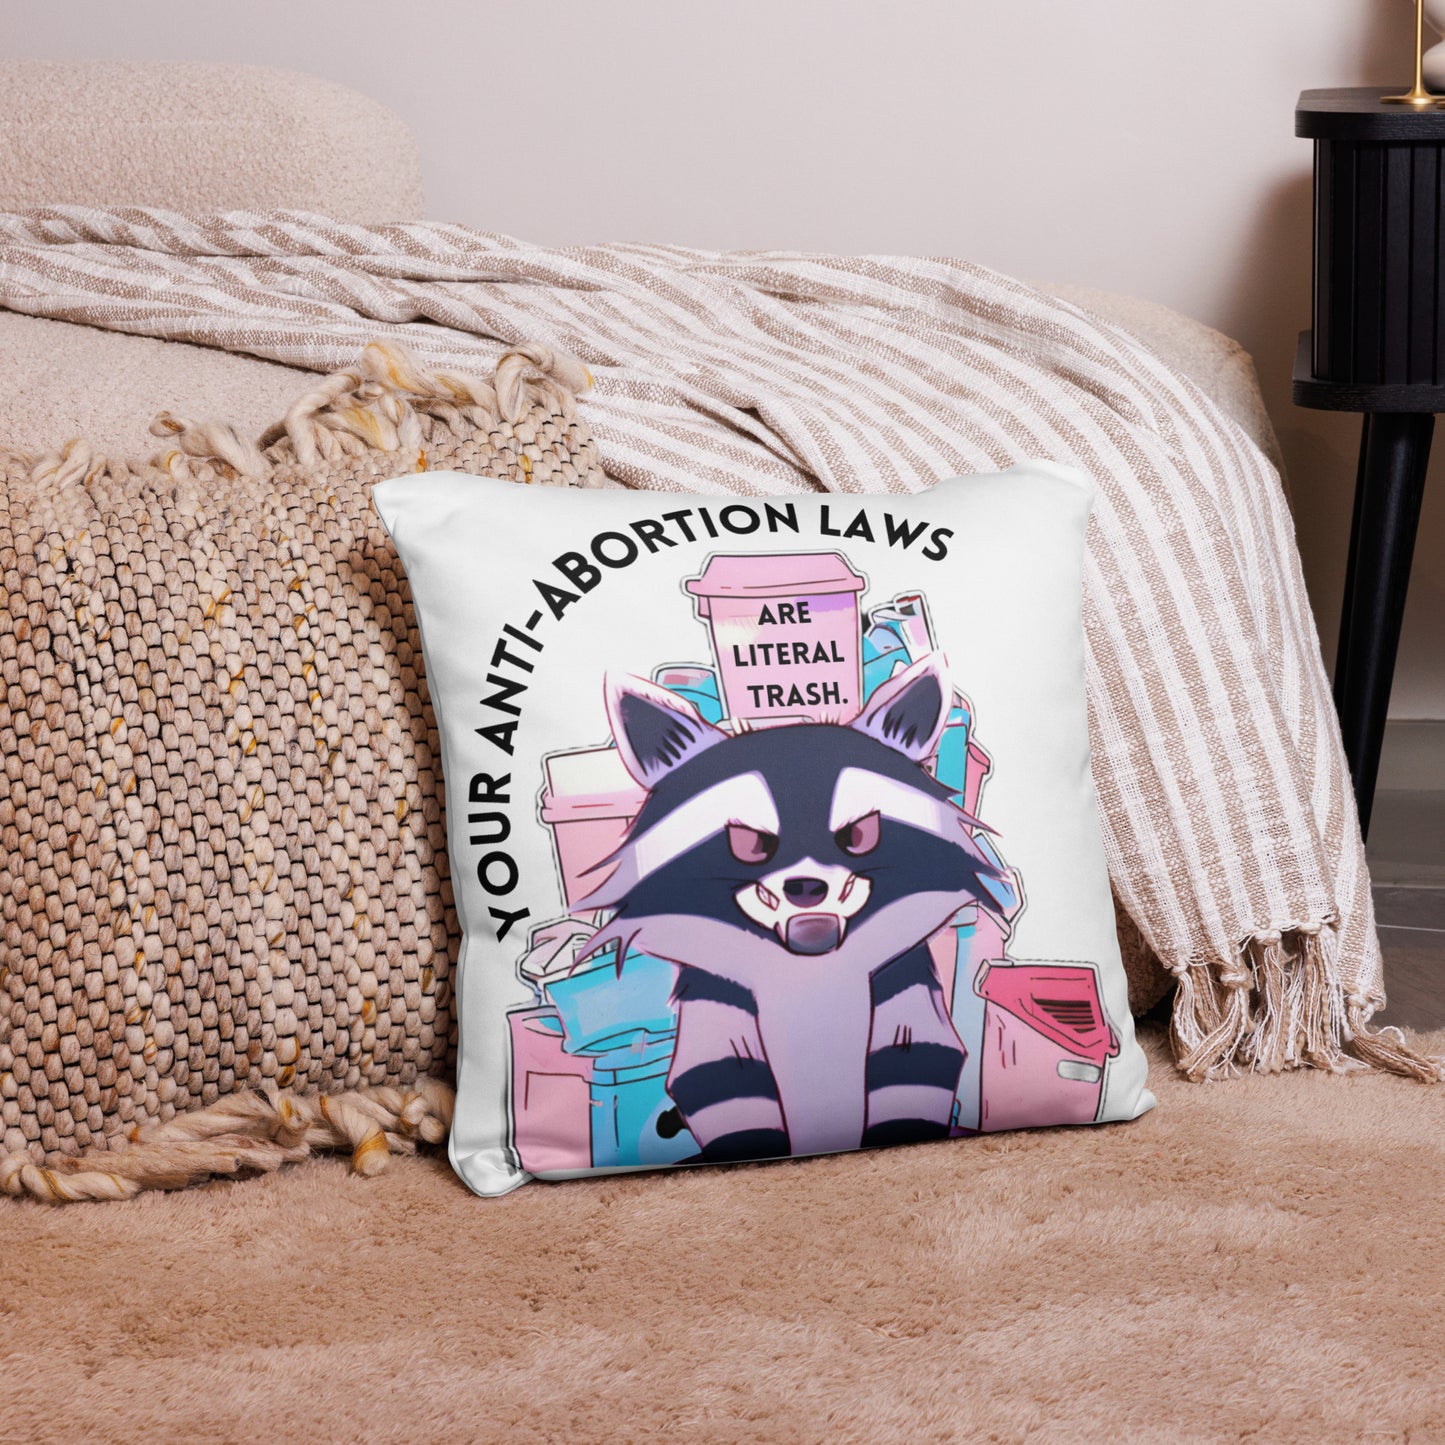 Your Anti-Abortion Laws Are Literal Trash Raccoon Throw Pillow